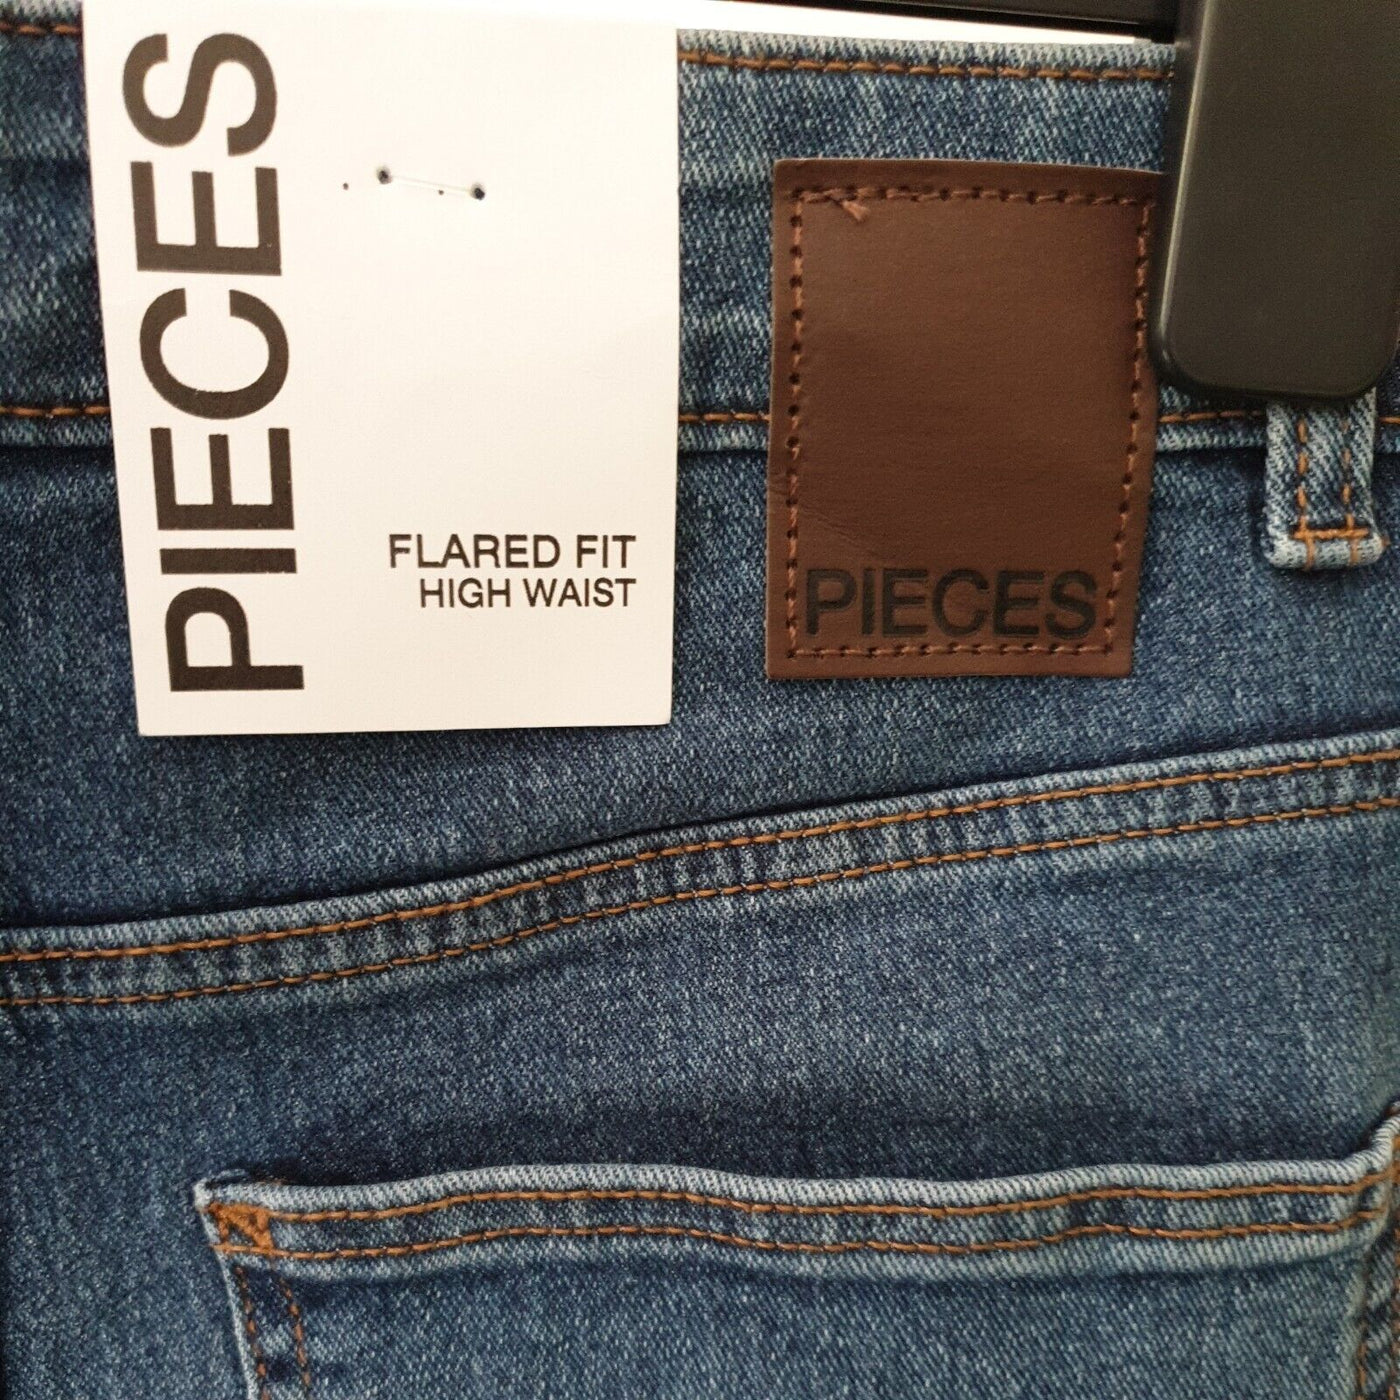 Pieces Flared Fit High Waist Jeans. Size Medium ***Ref V375